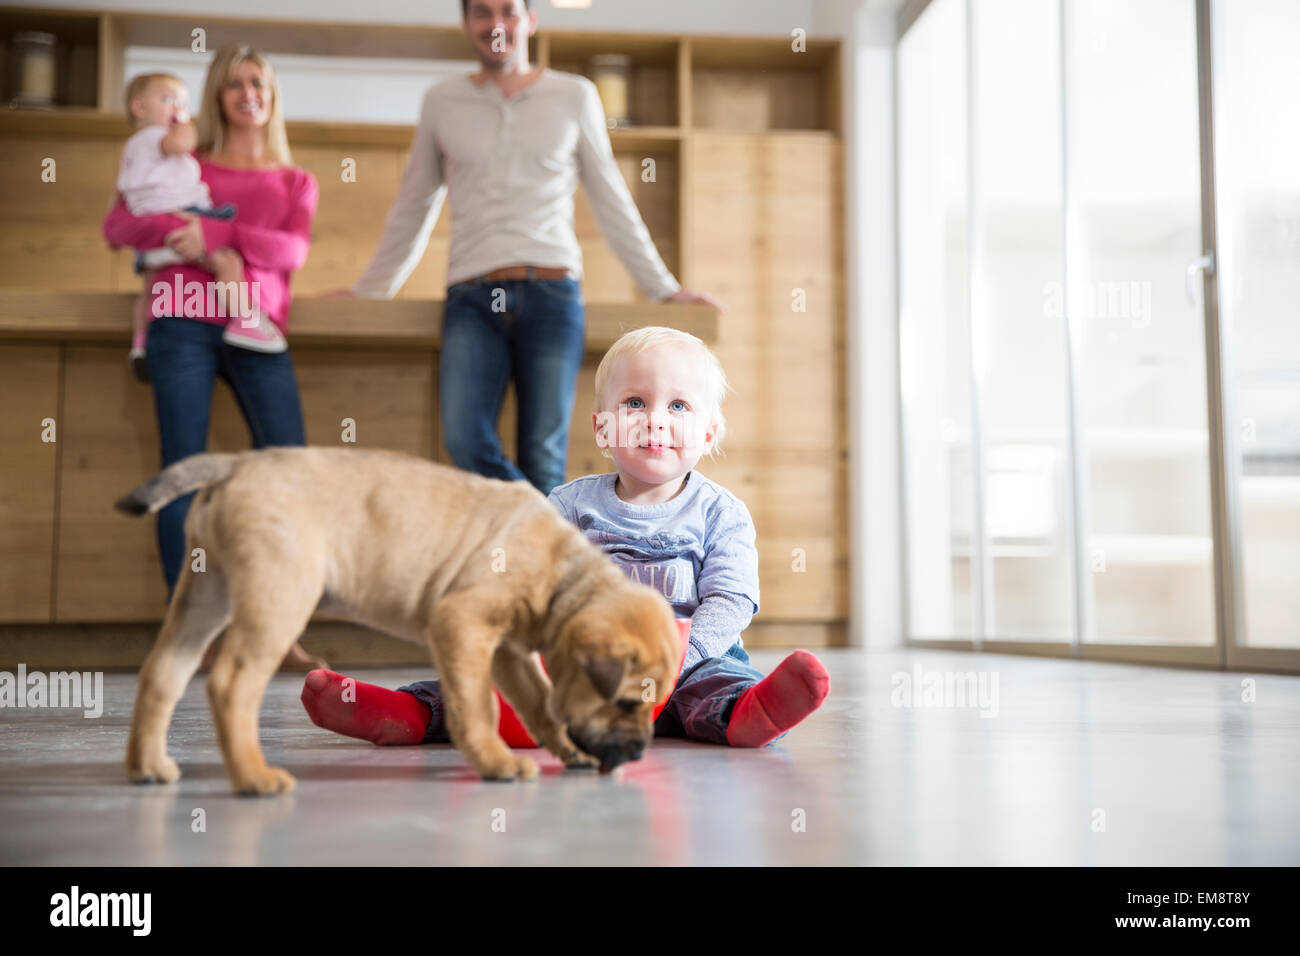 Family watching male toddler with puppy on dining room floor Stock Photo